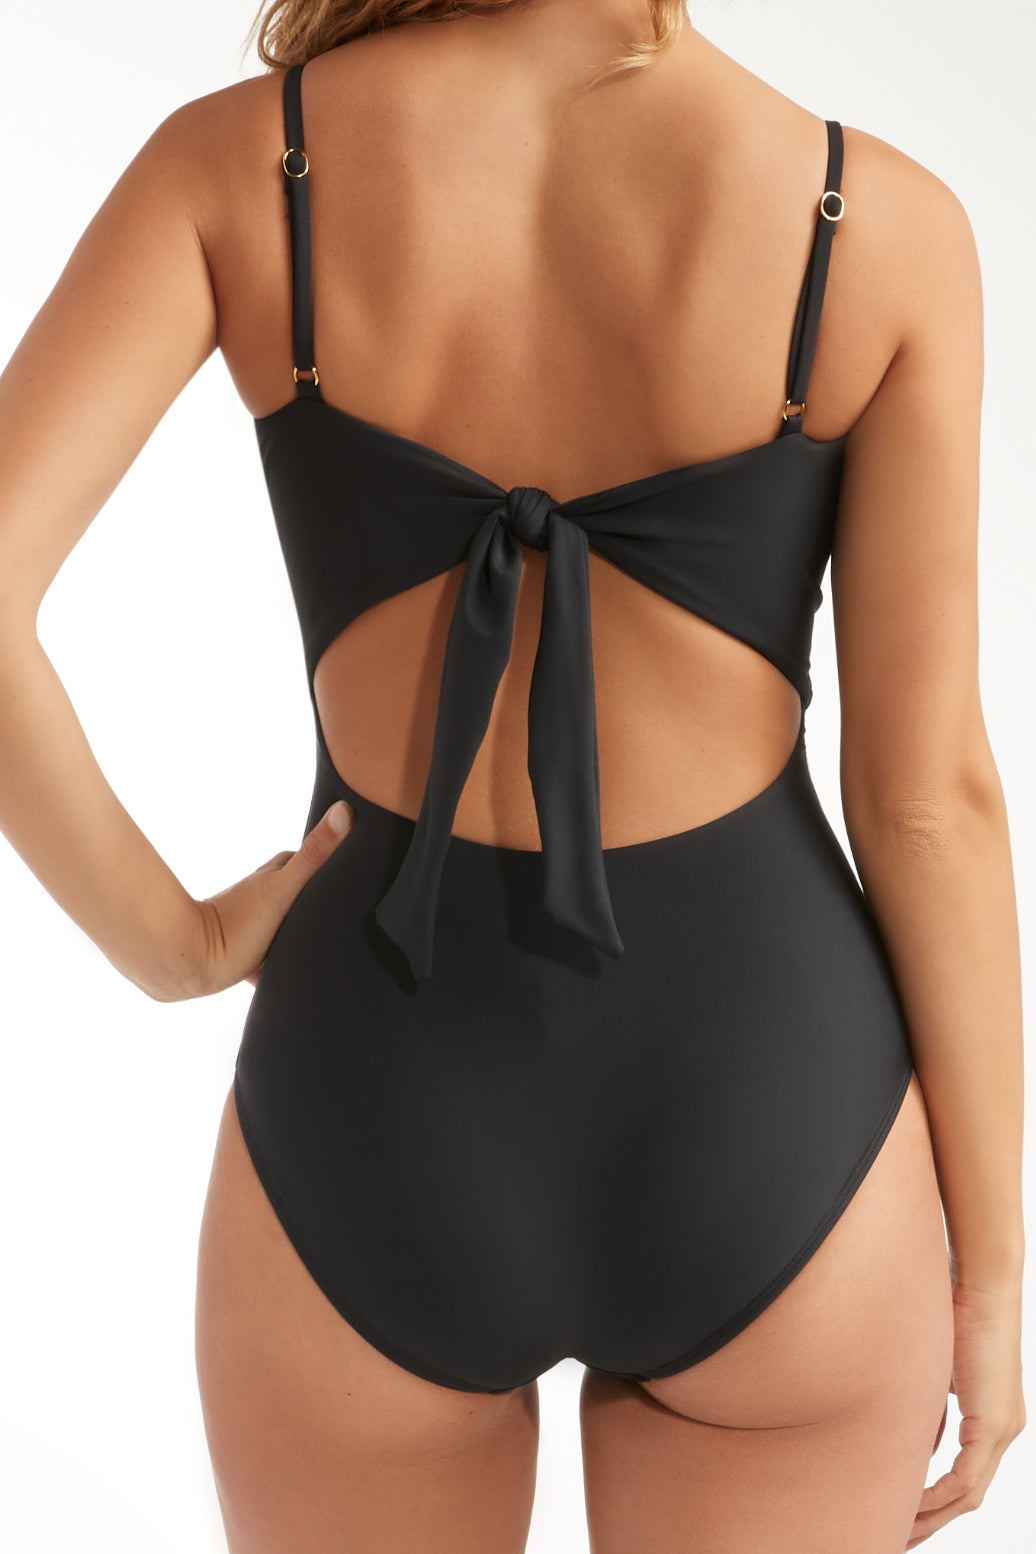 Cecilia One-Piece Swimsuit by Hermoza